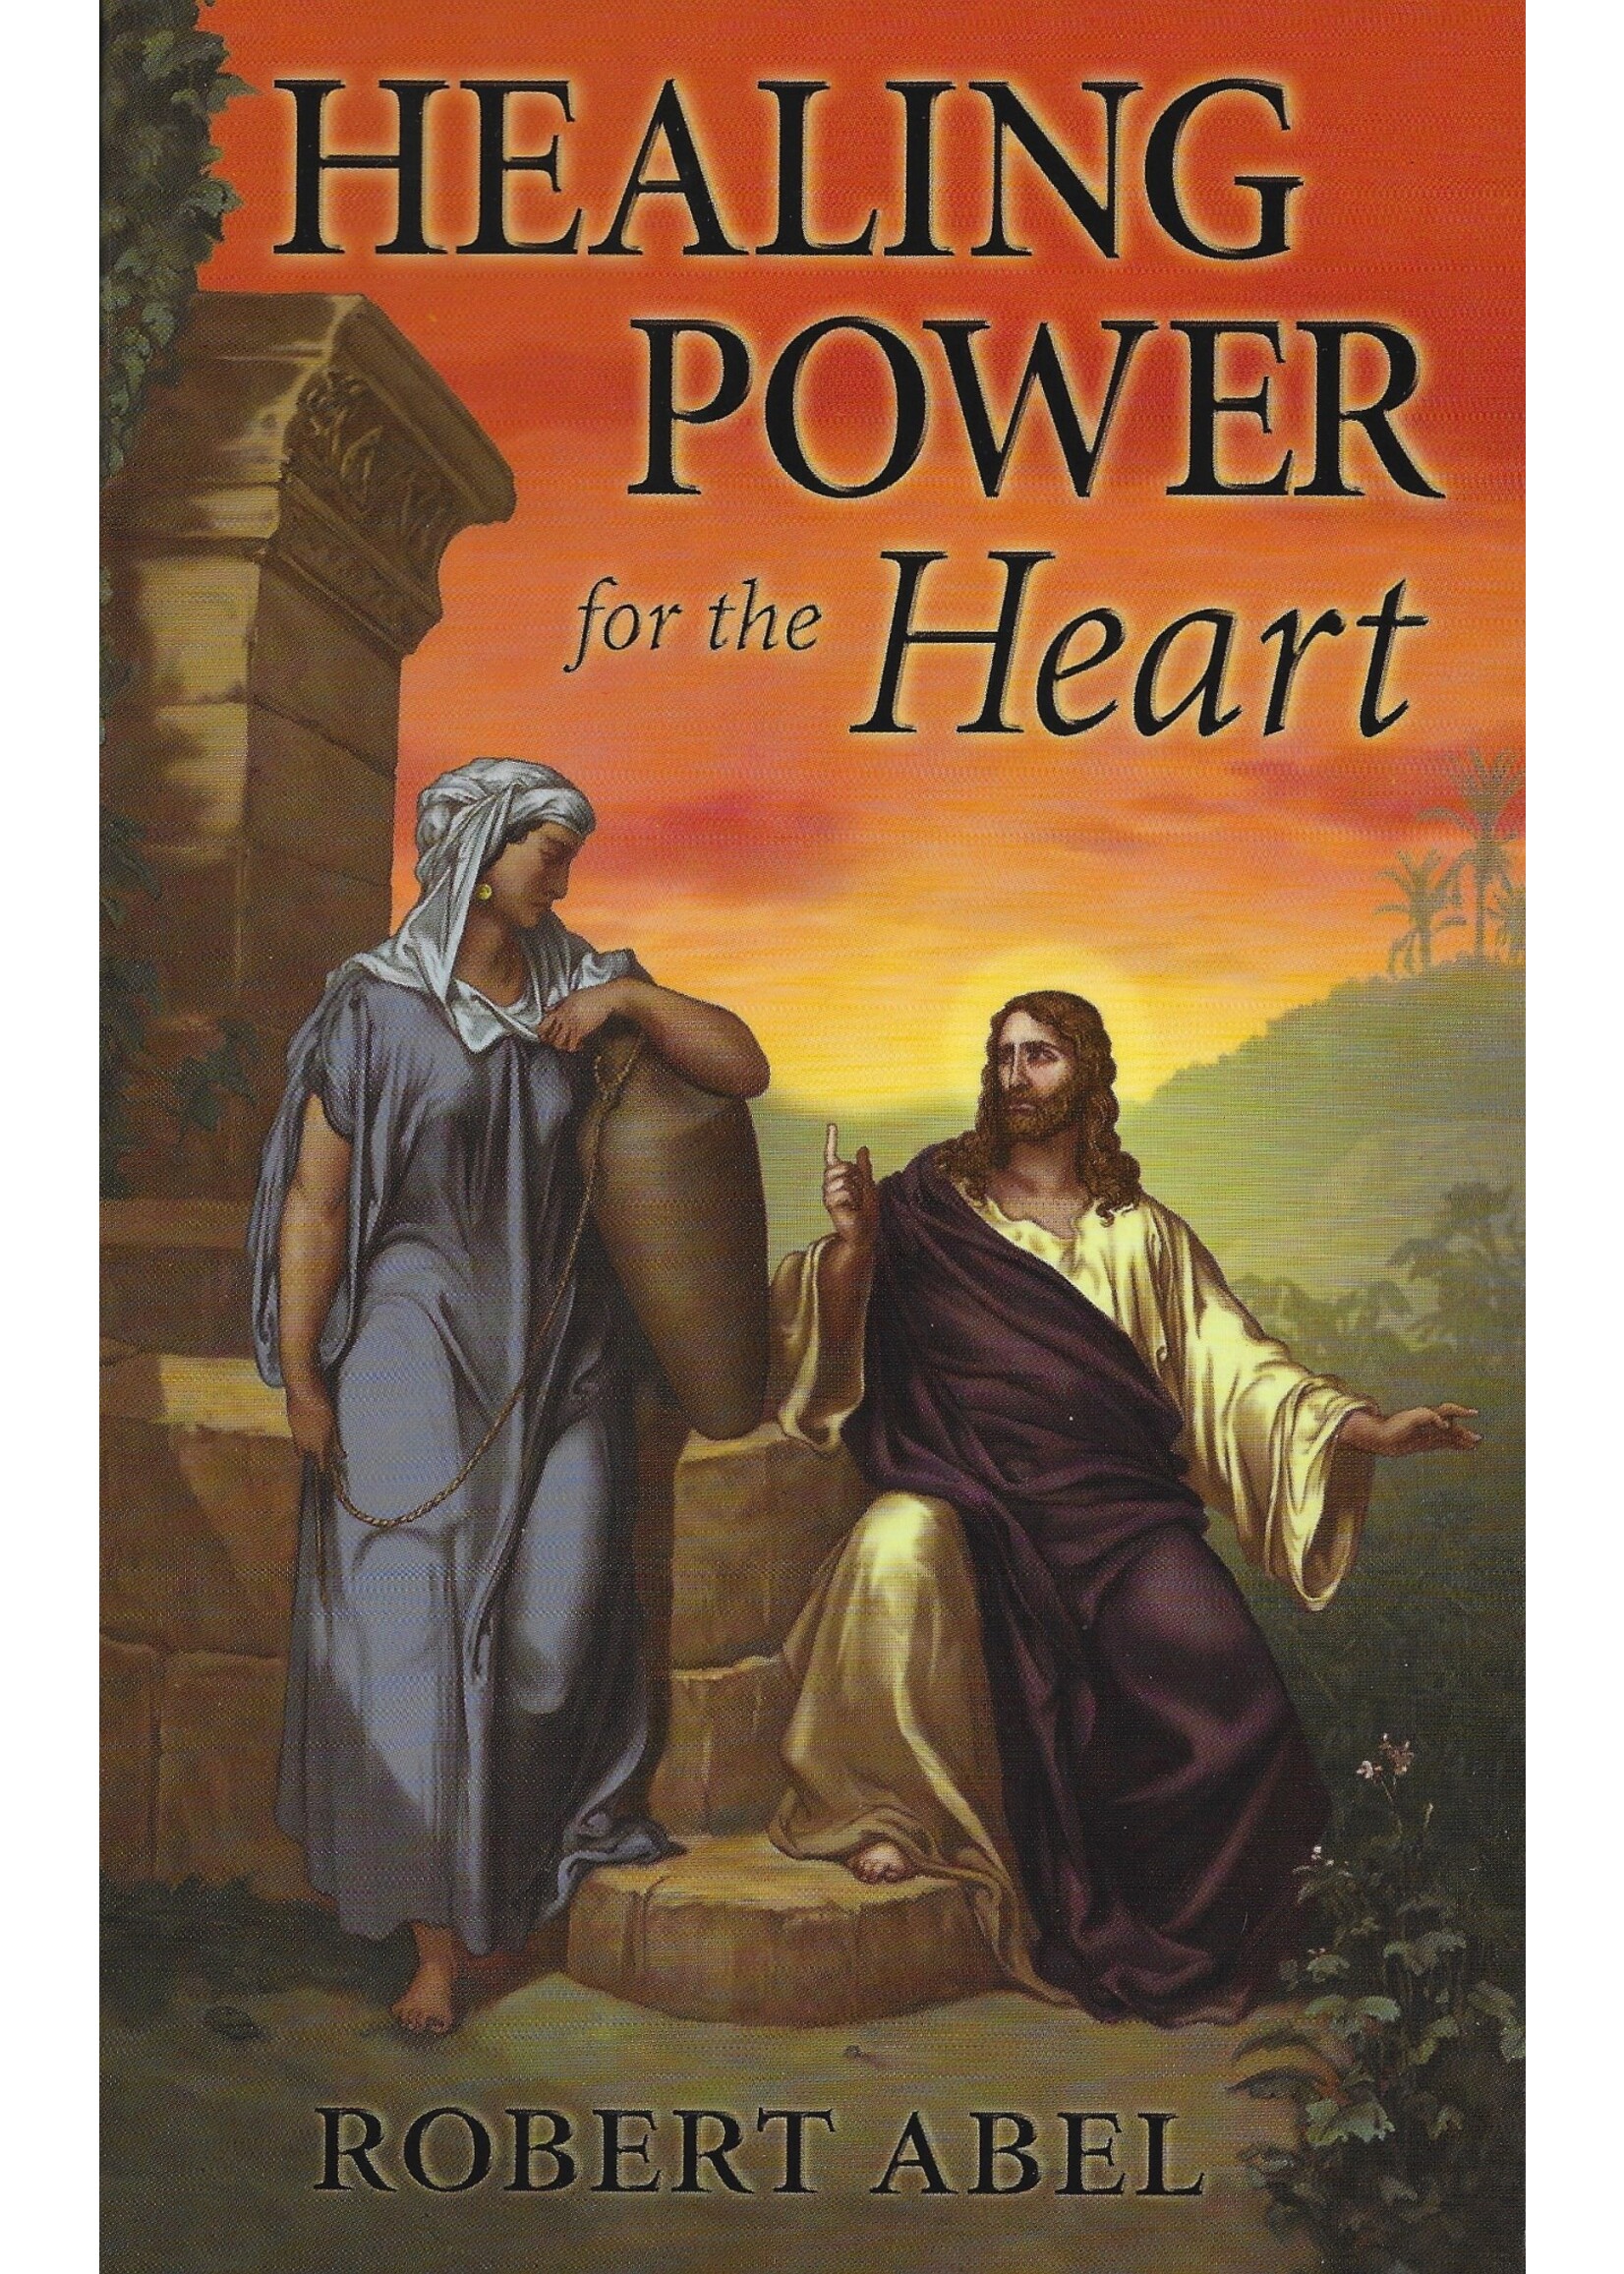 Healing Power for the Heart